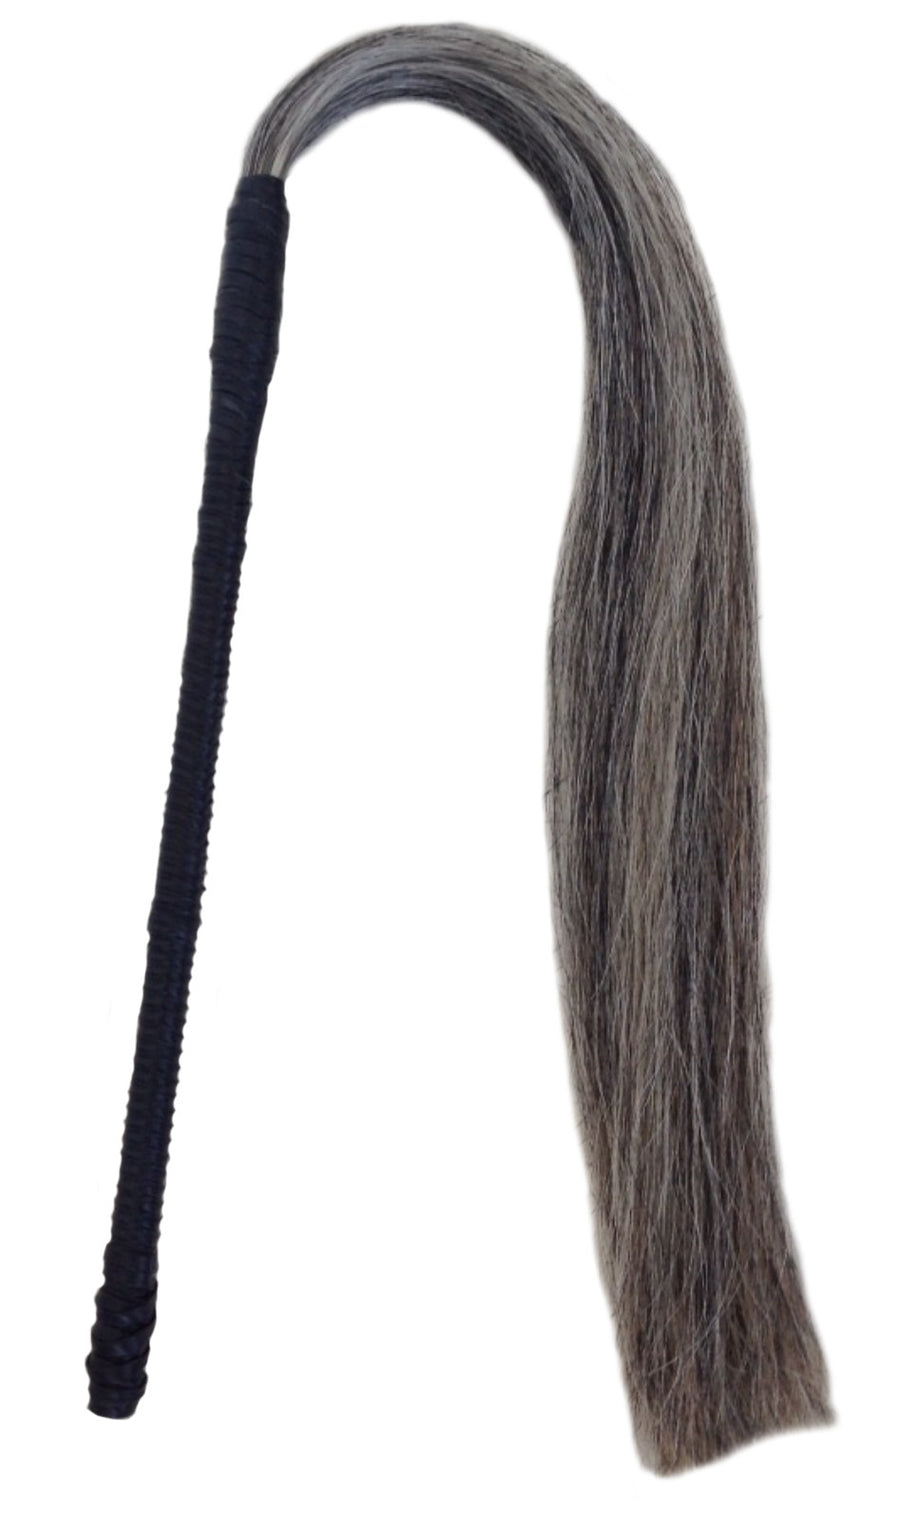 Horse Hair Whip Wendy Nichol Leather Designer Handmade in NYC New York City Dominatrix Bondage S&M Whip Leather Wrap Braided Magician Witch Wand Hair Broom Salt and Pepper Gray Grey Hair Brunette Brown Hair Red Redhead Blonde White Hair Head